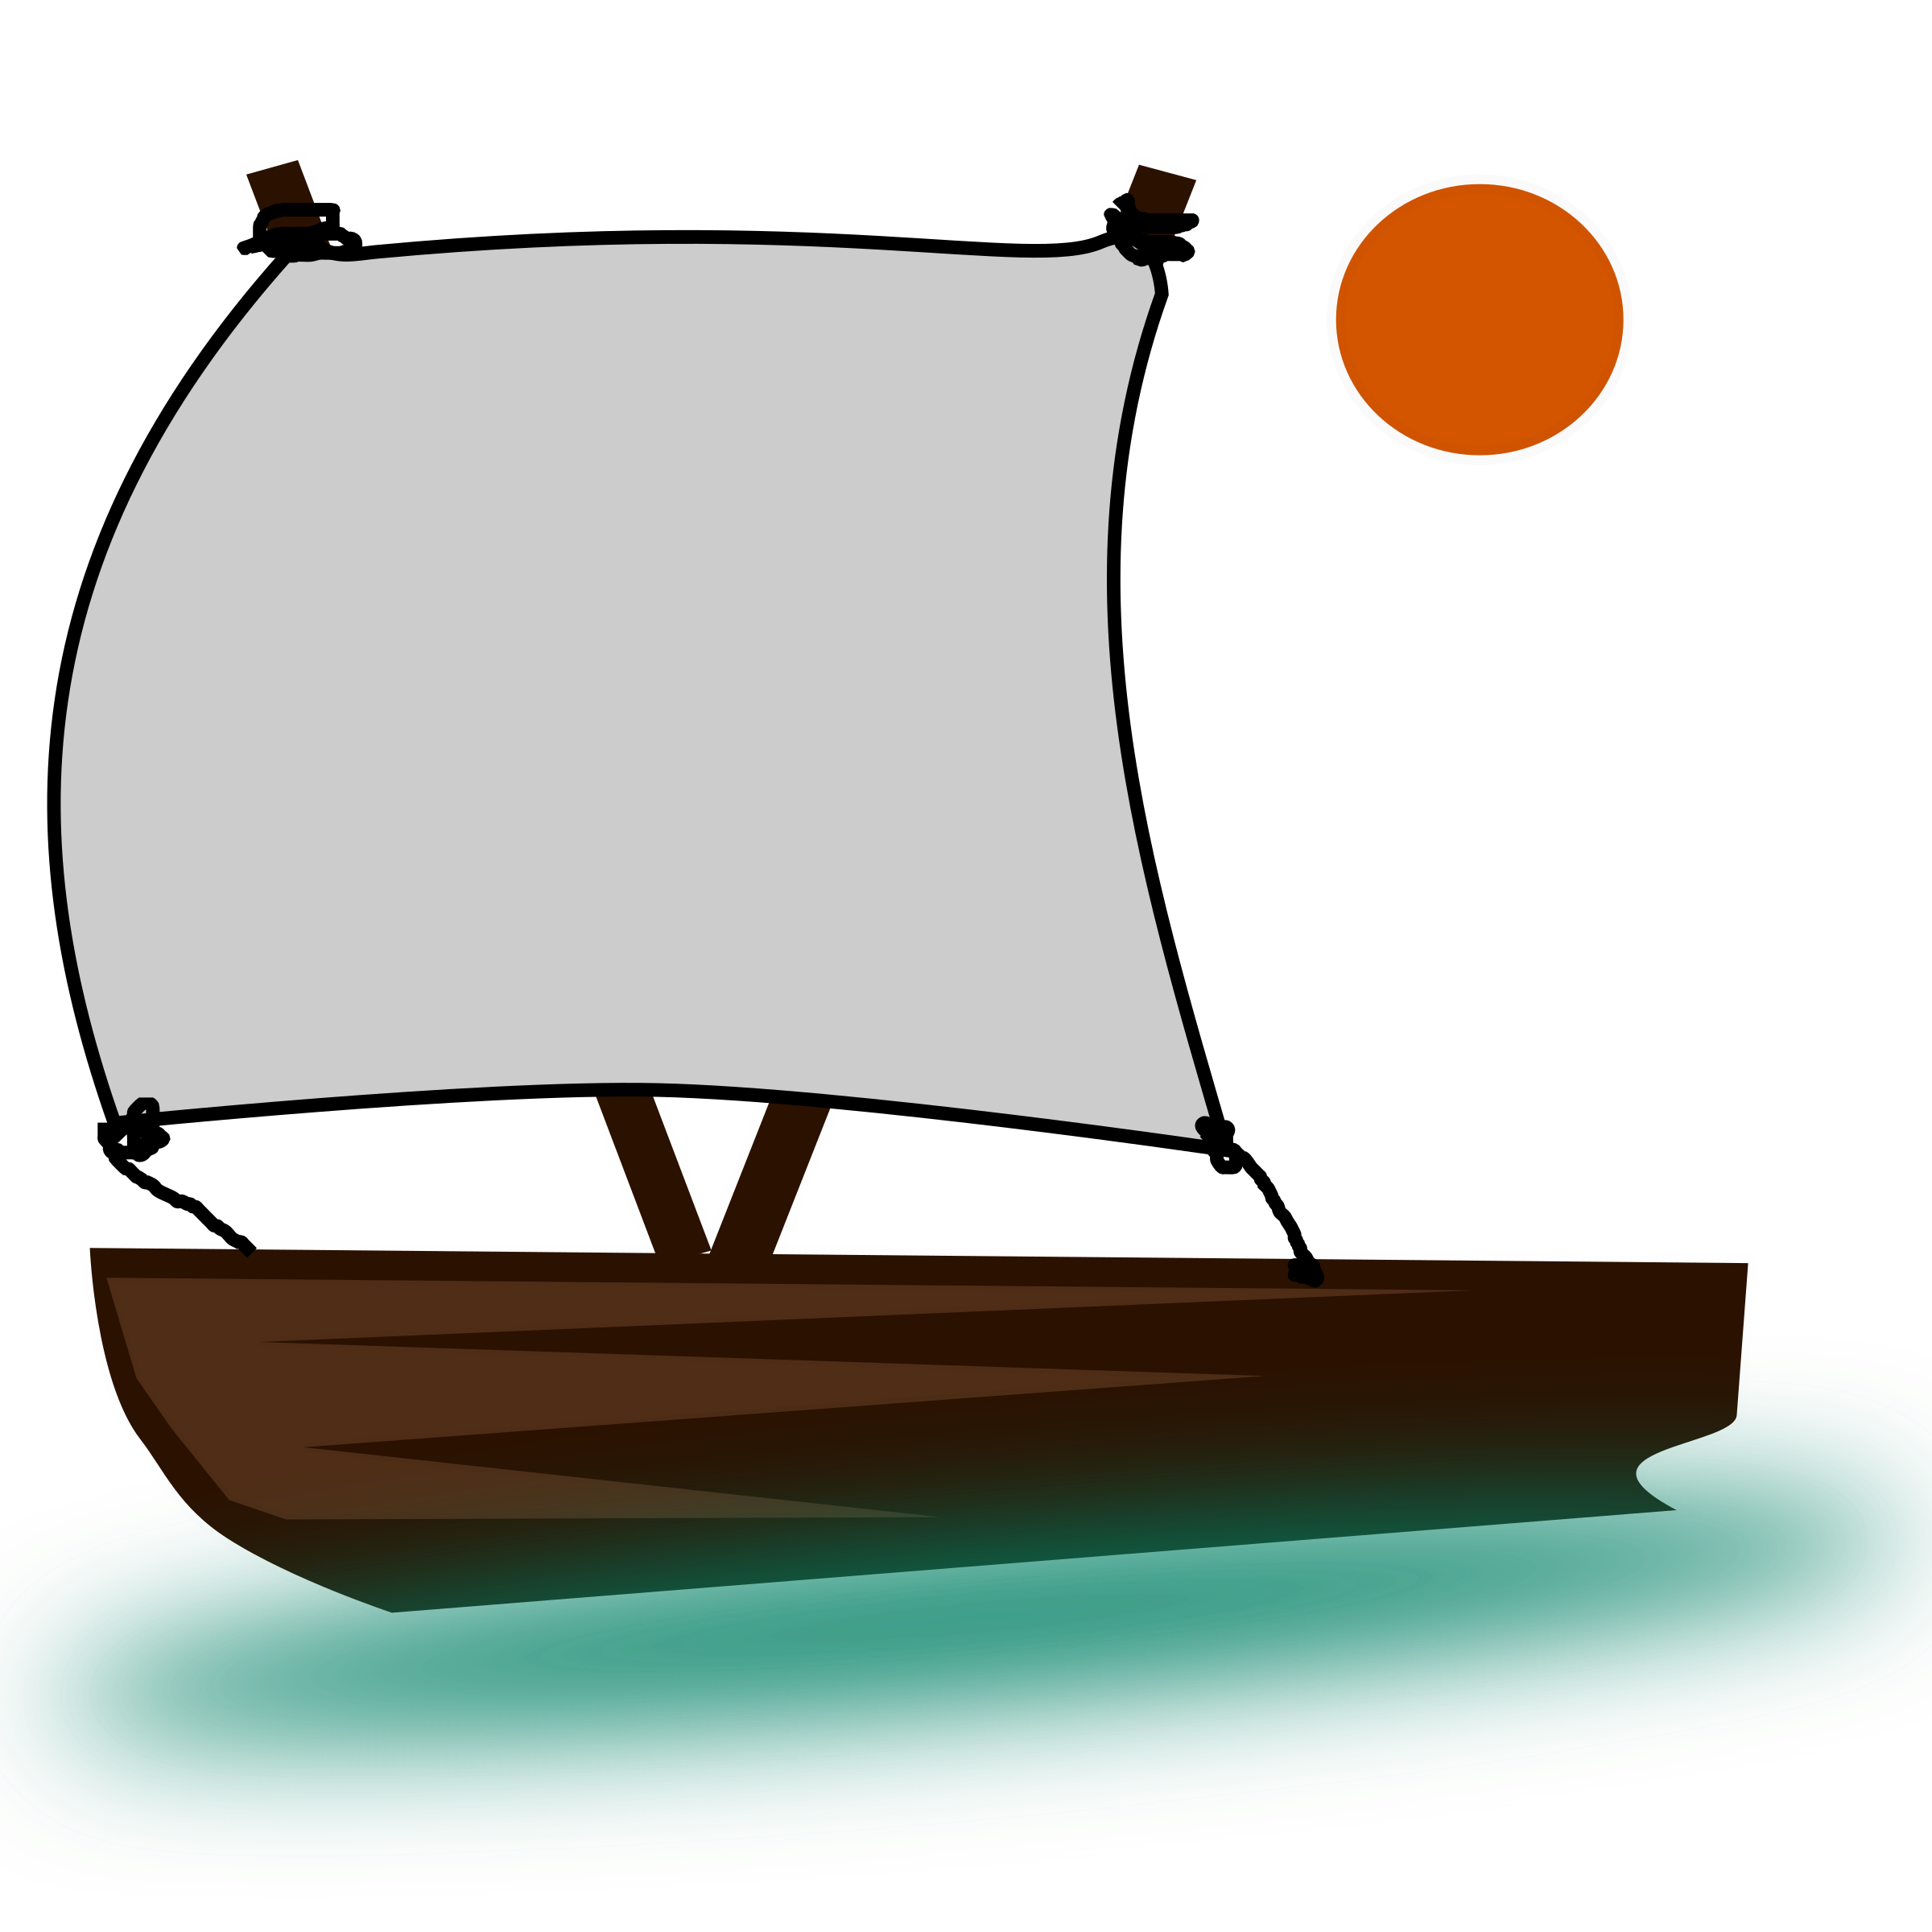 https://openclipart.org/image/2400px/svg_to_png/31741/pinisi-boat.png